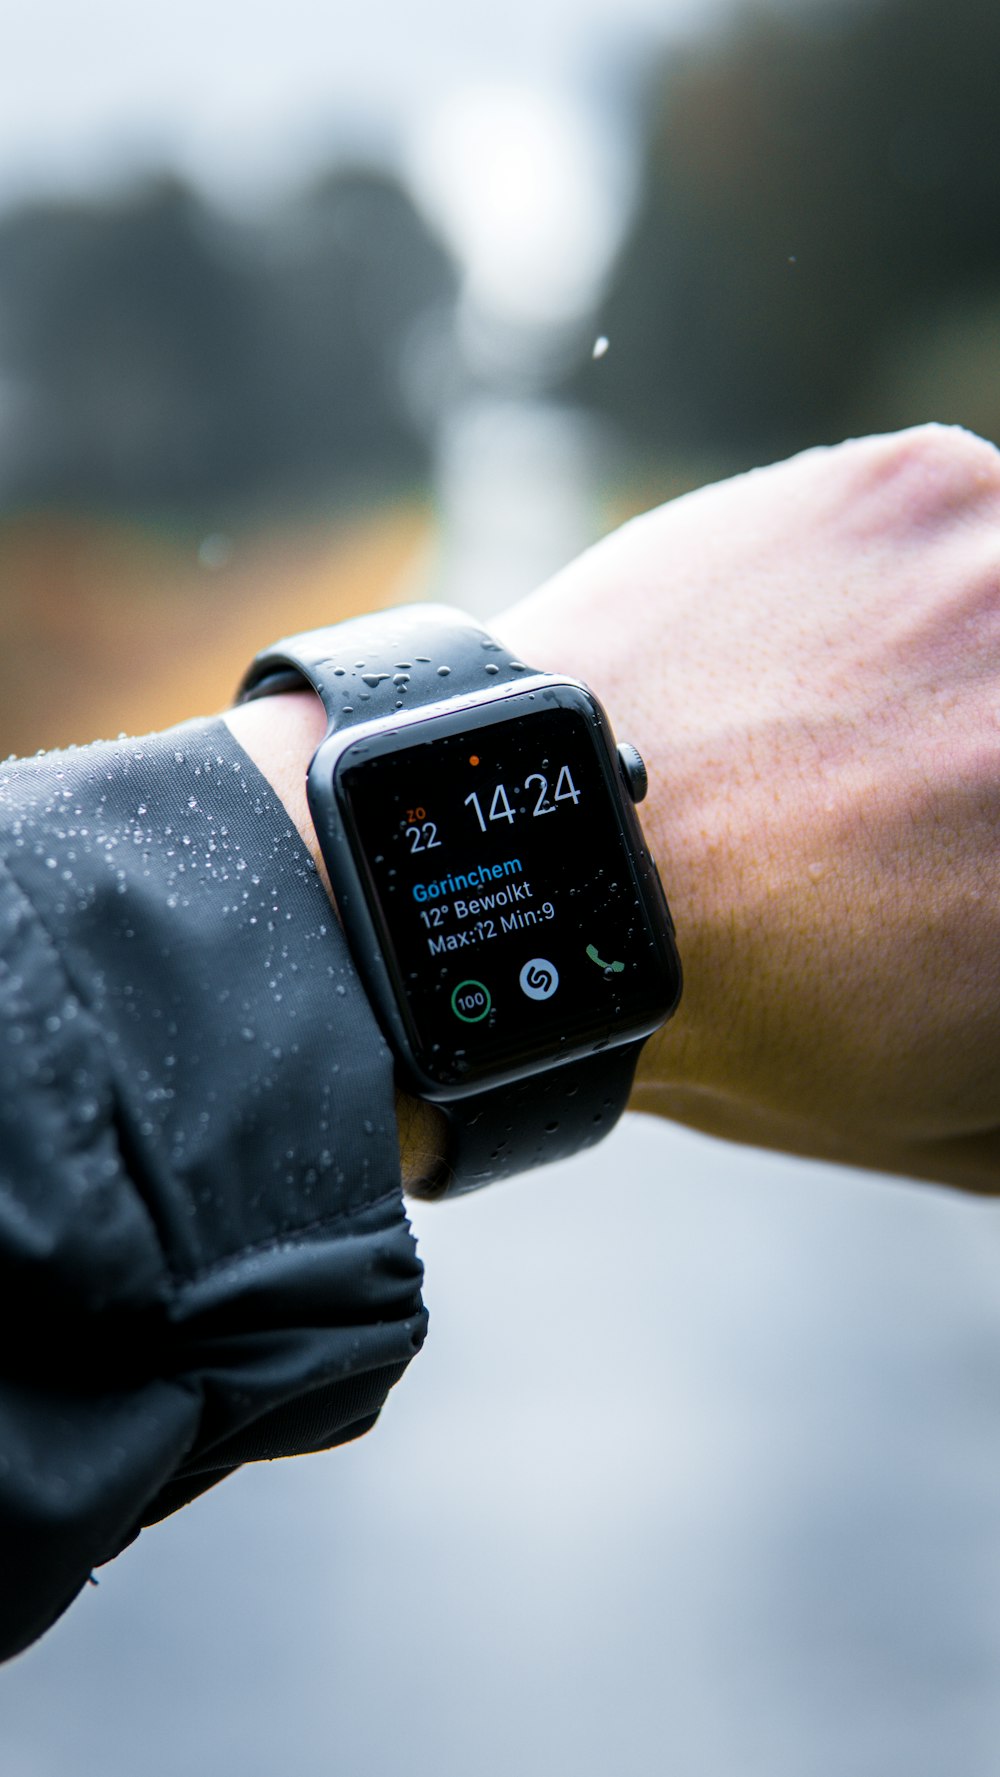 HQ] Smart Watch Pictures | Download Free Images on Unsplash